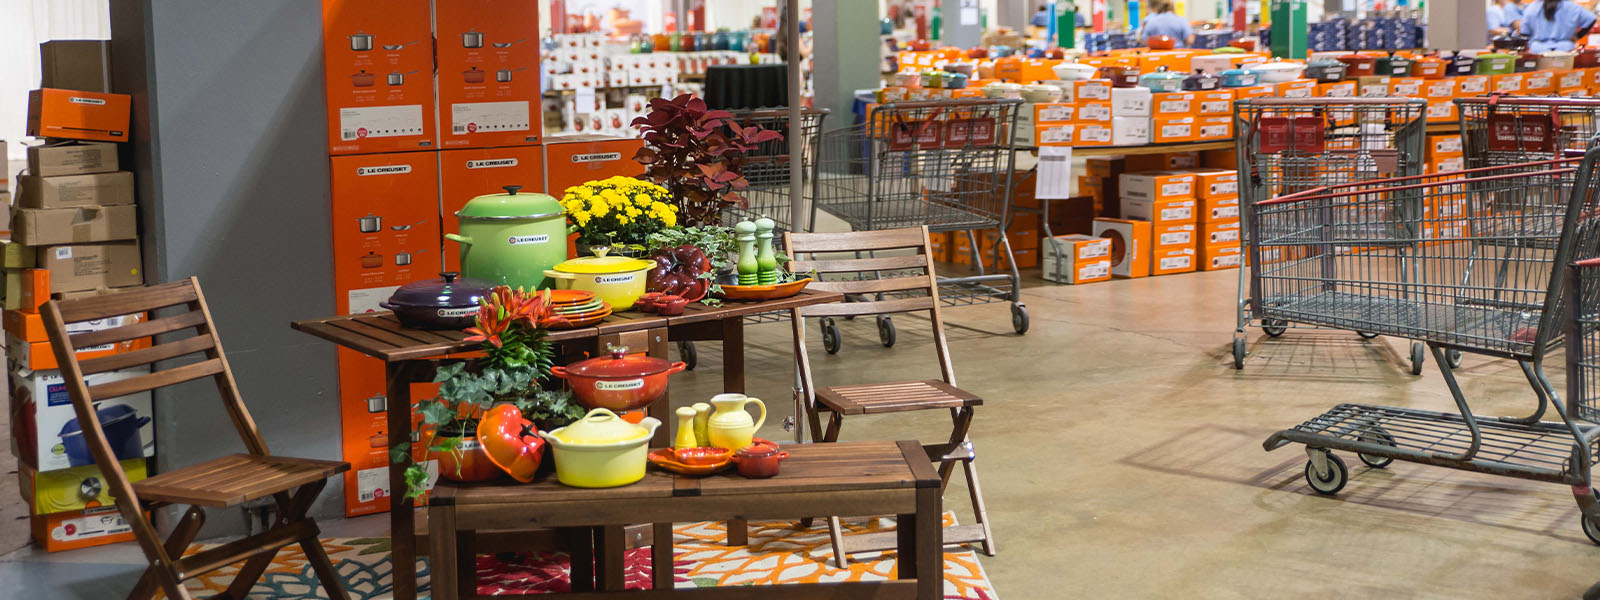 The Le Creuset Store in Leawood, Kansas Is Having a Huge Sales Event